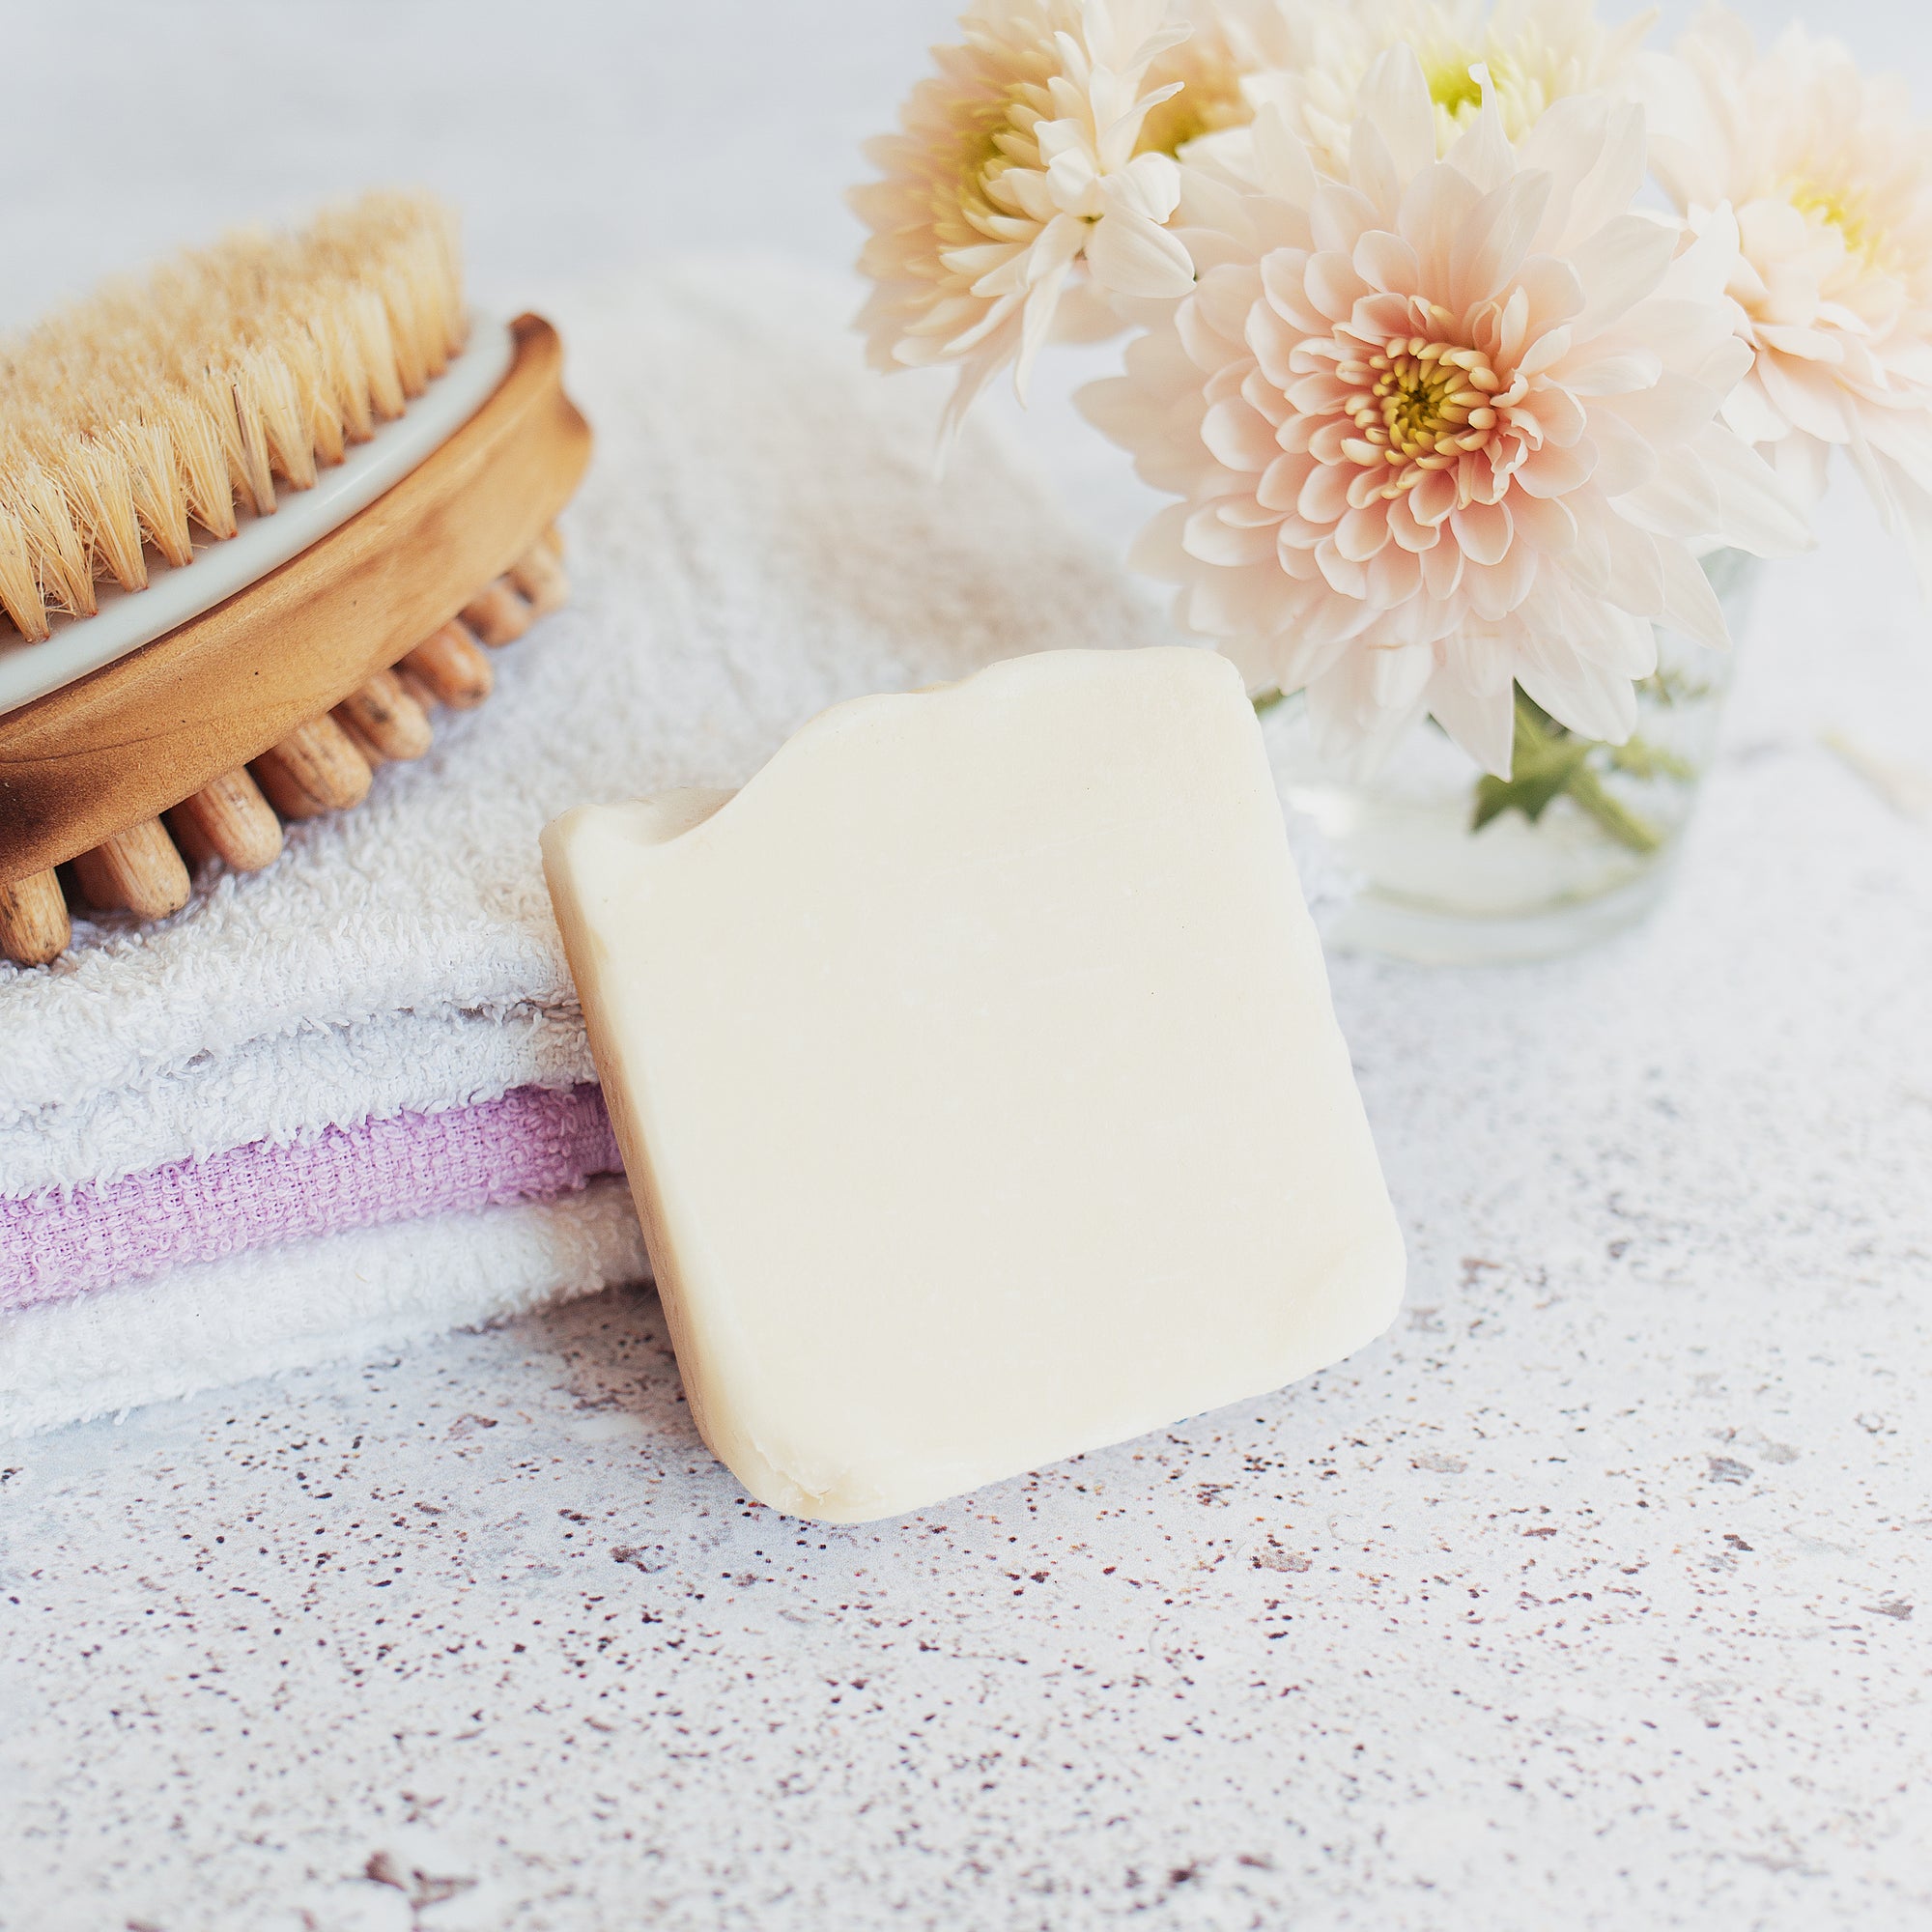 Goat Milk Soap - Lifestyle on top of towels and next to brush and flowers